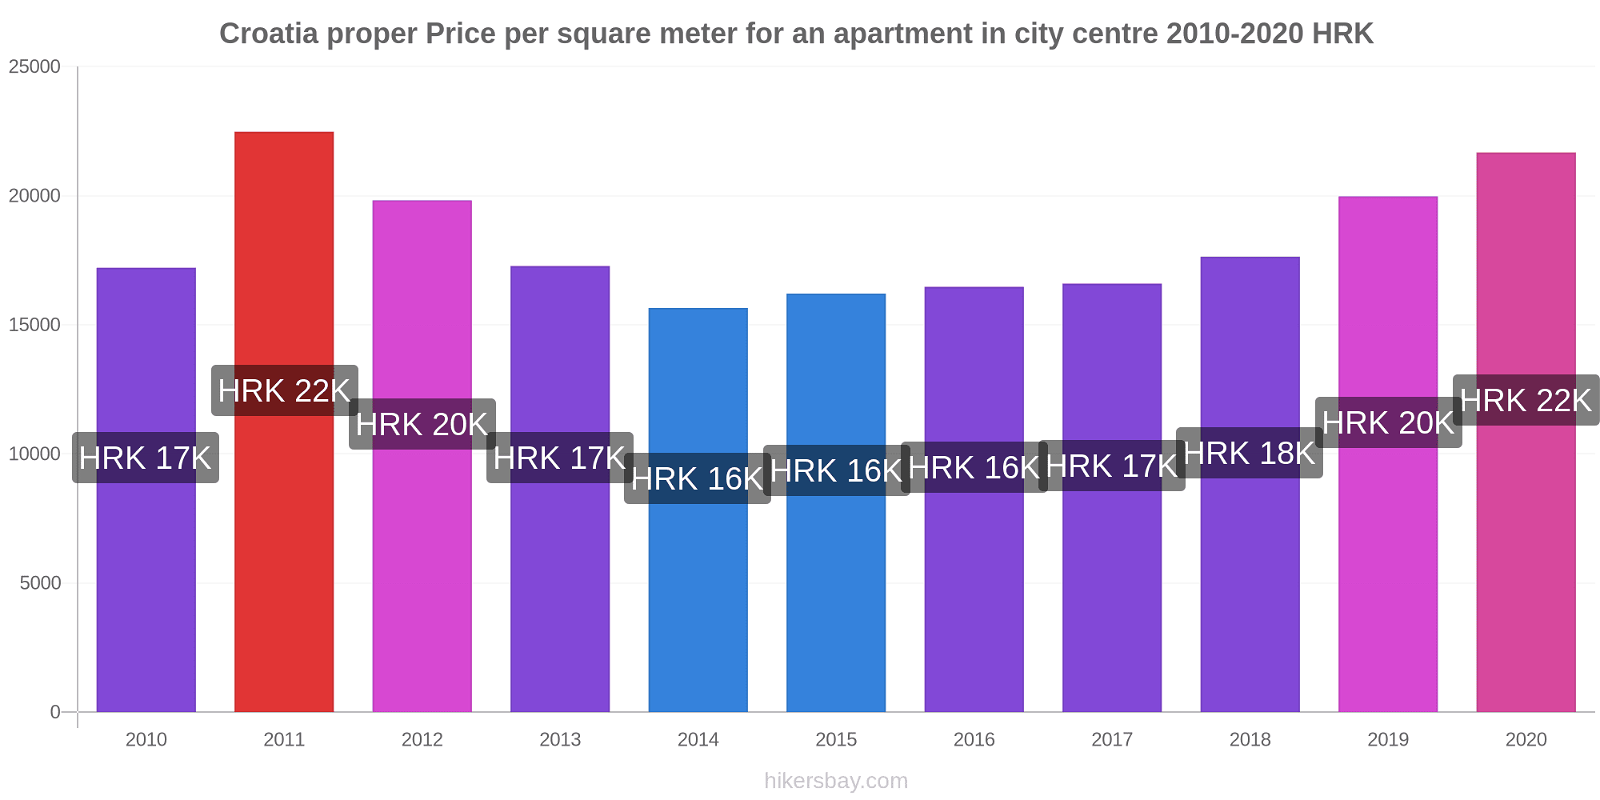 Croatia proper price changes Price per square meter for an apartment in city centre hikersbay.com